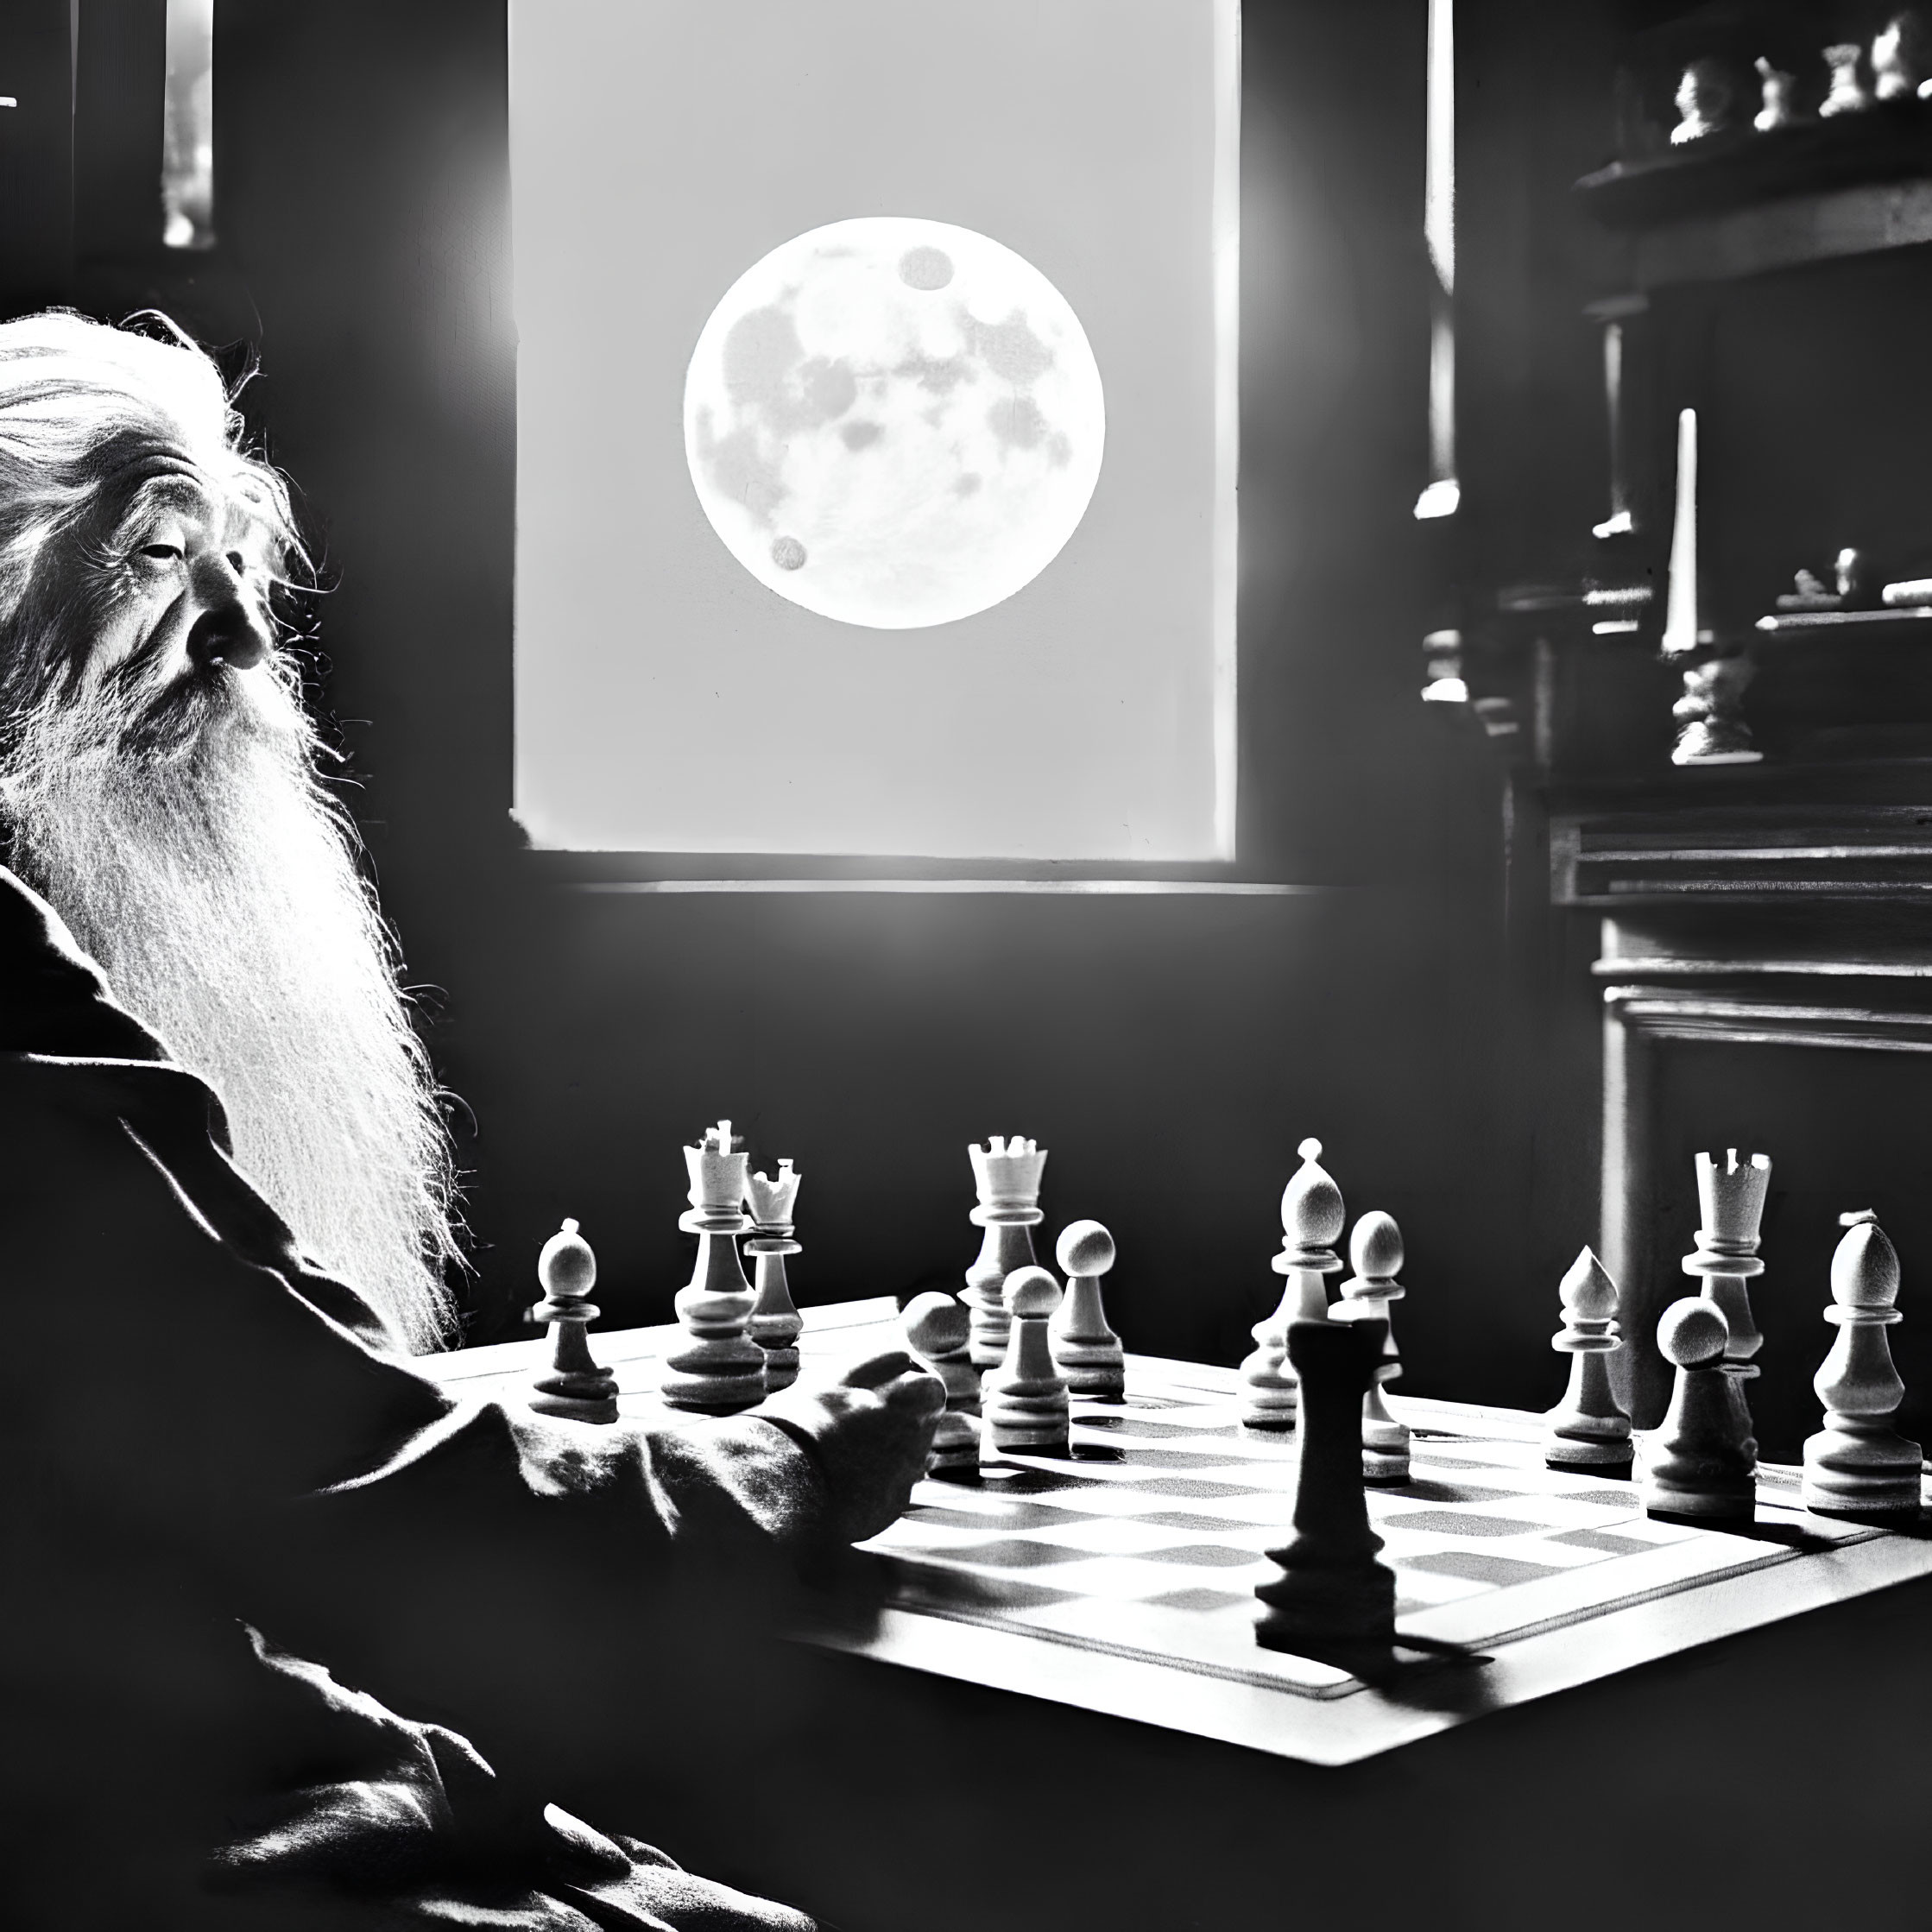 Monochrome image of bearded person contemplating chessboard by moonlit window